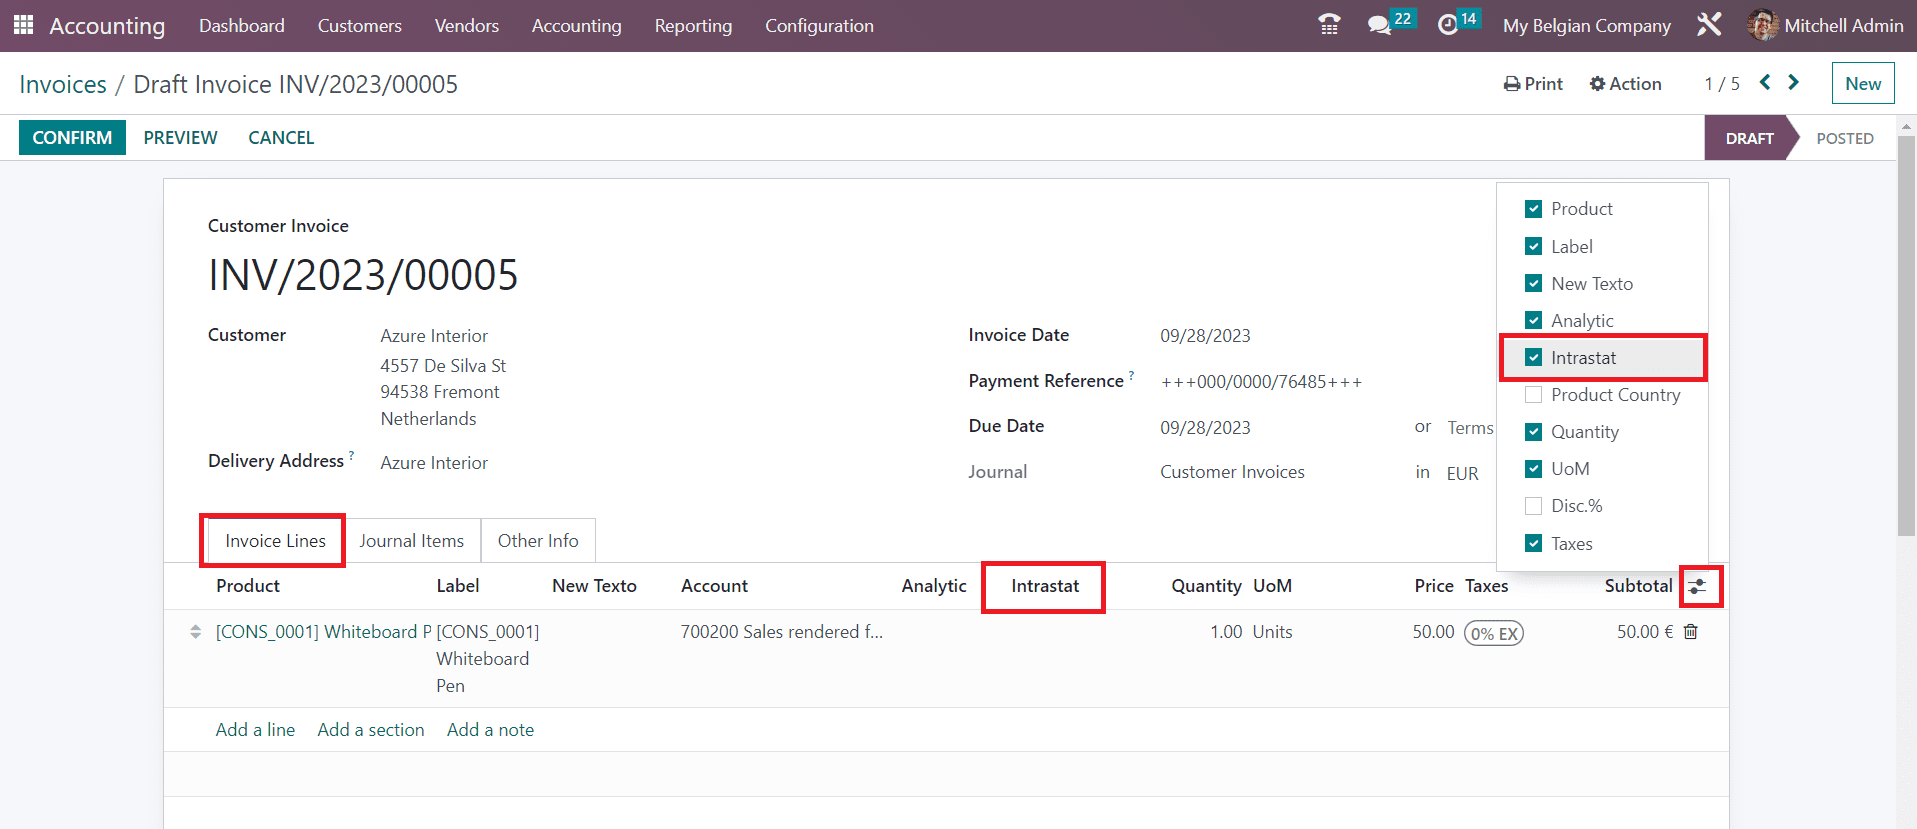 how-to-manage-intra-community-trade-using-intrastat-in-odoo-16-4-cybrosys